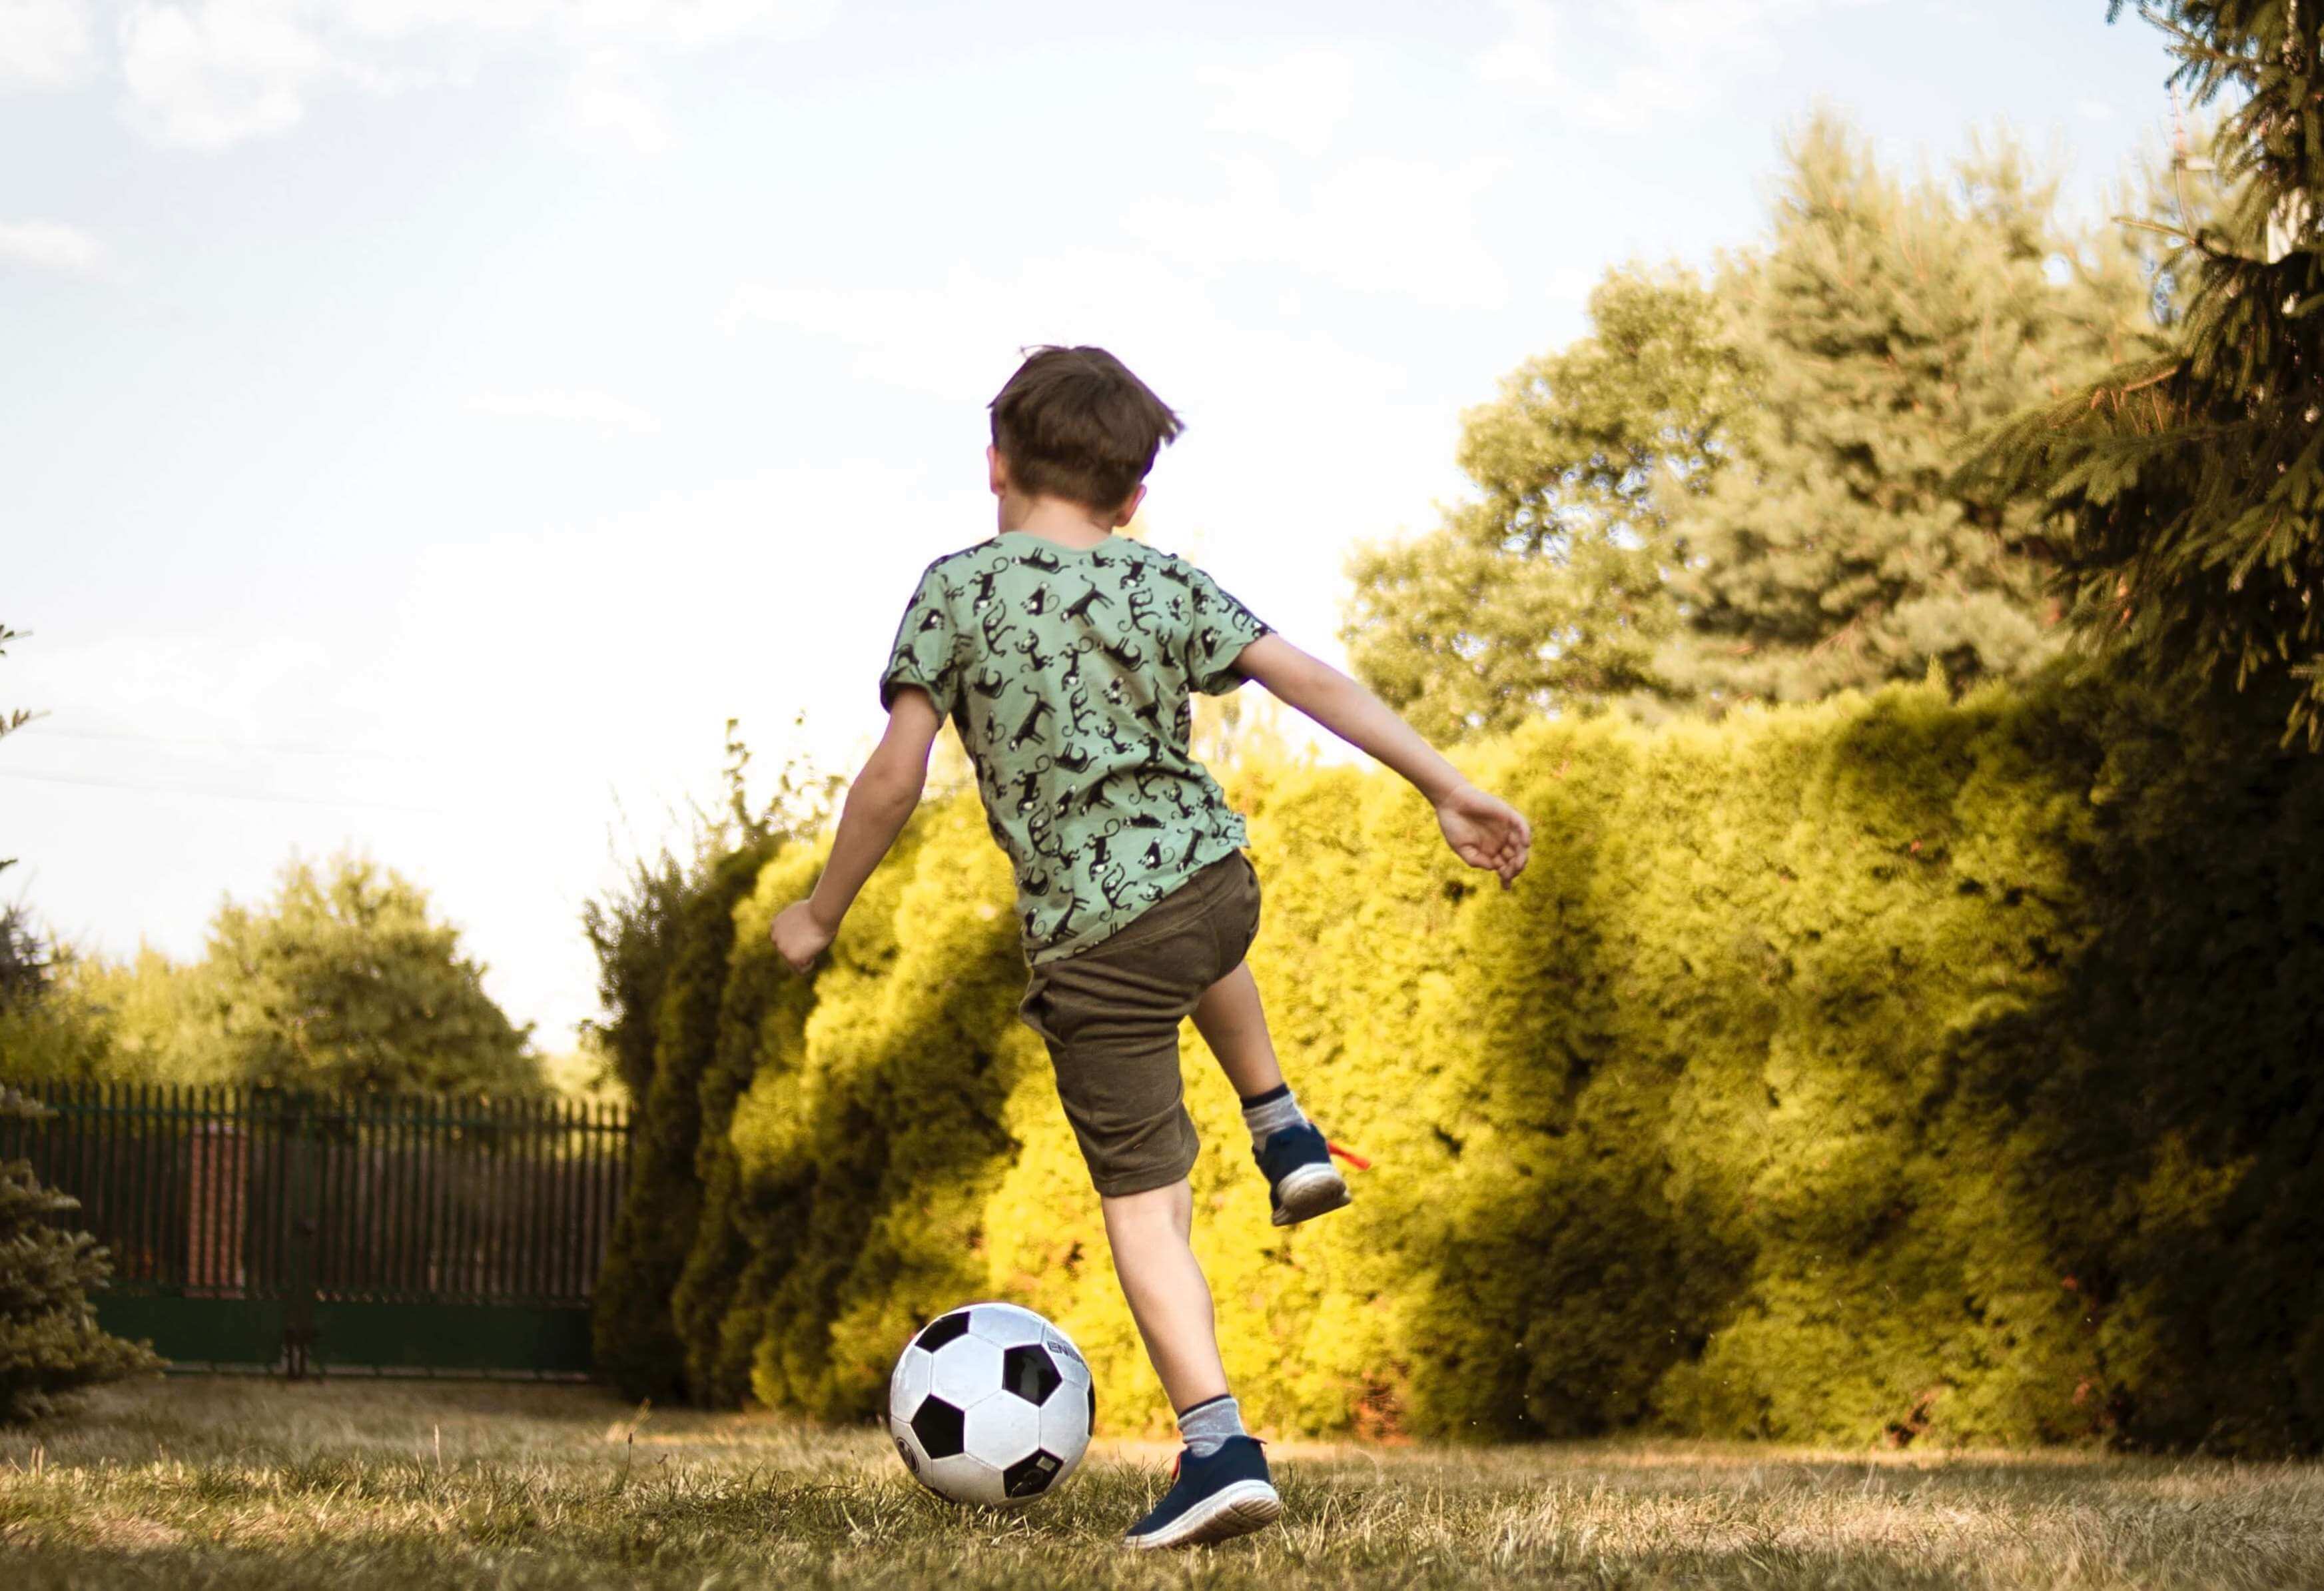 low-angle-photo-of-a-boy-playing-soccer-2682543